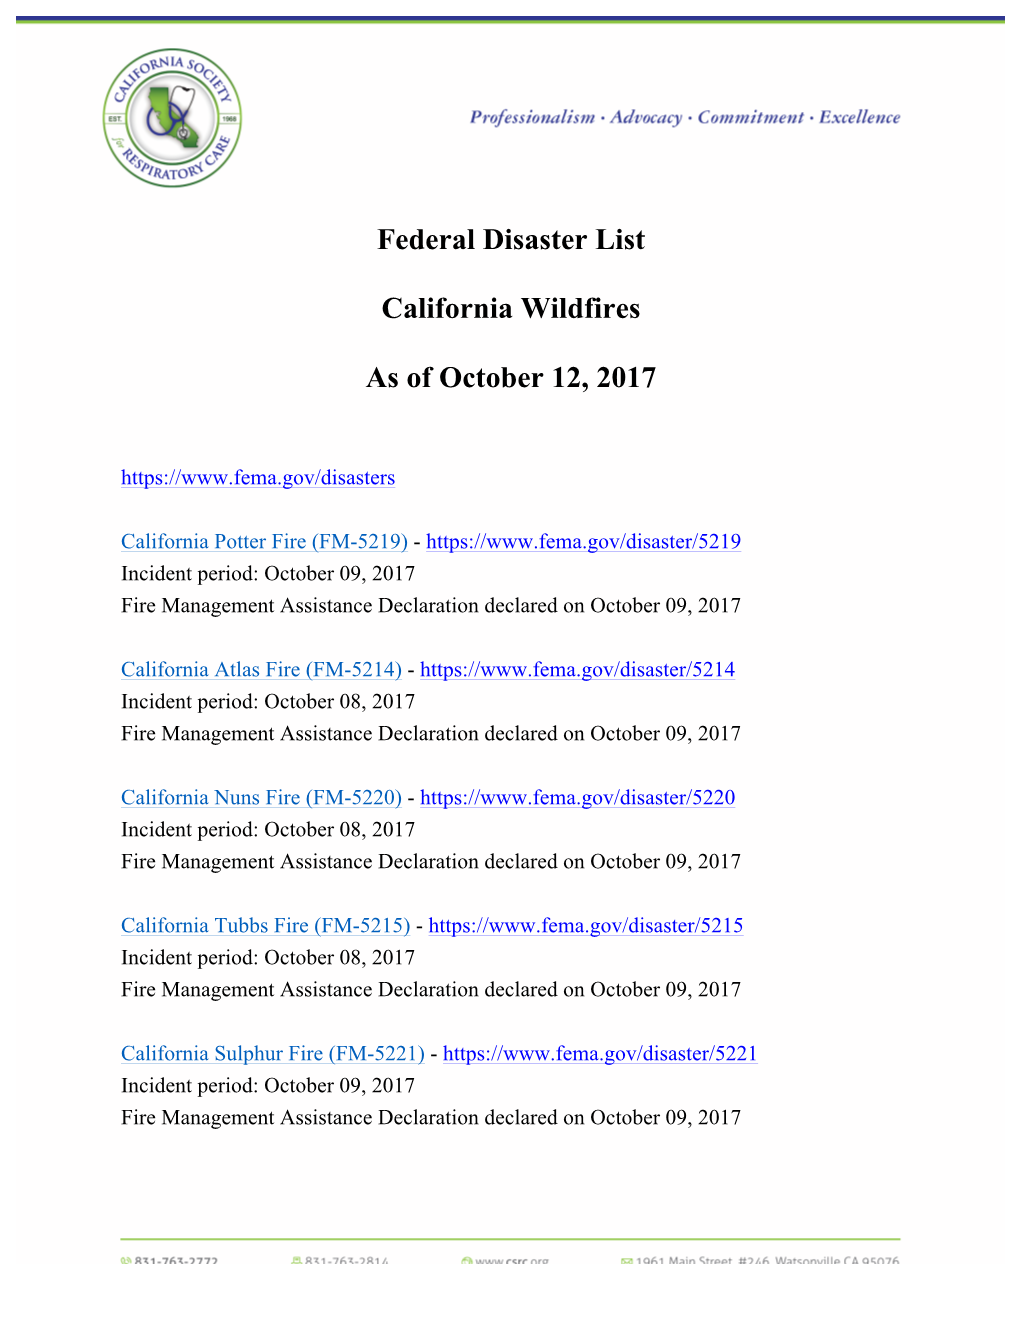 Federal Disaster List California Wildfires As of October 12, 2017